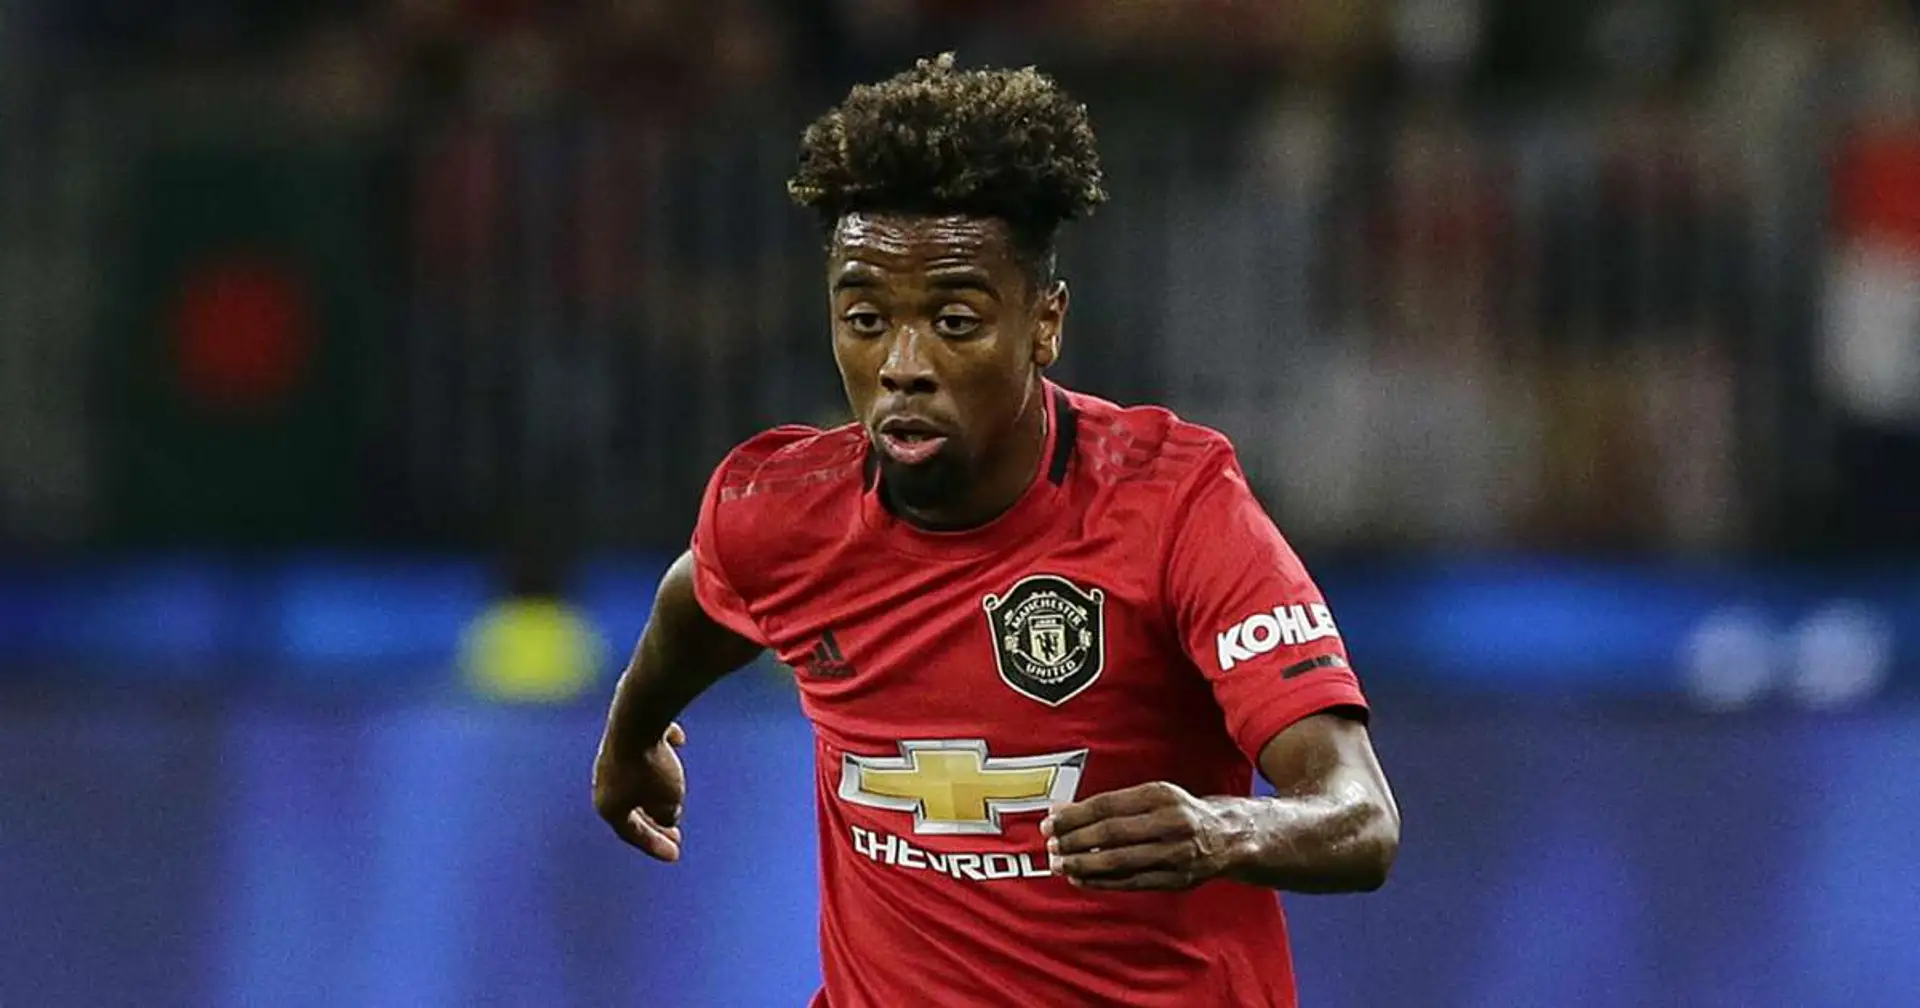 OFFICIAL: Manchester United confirm Angel Gomes' exit